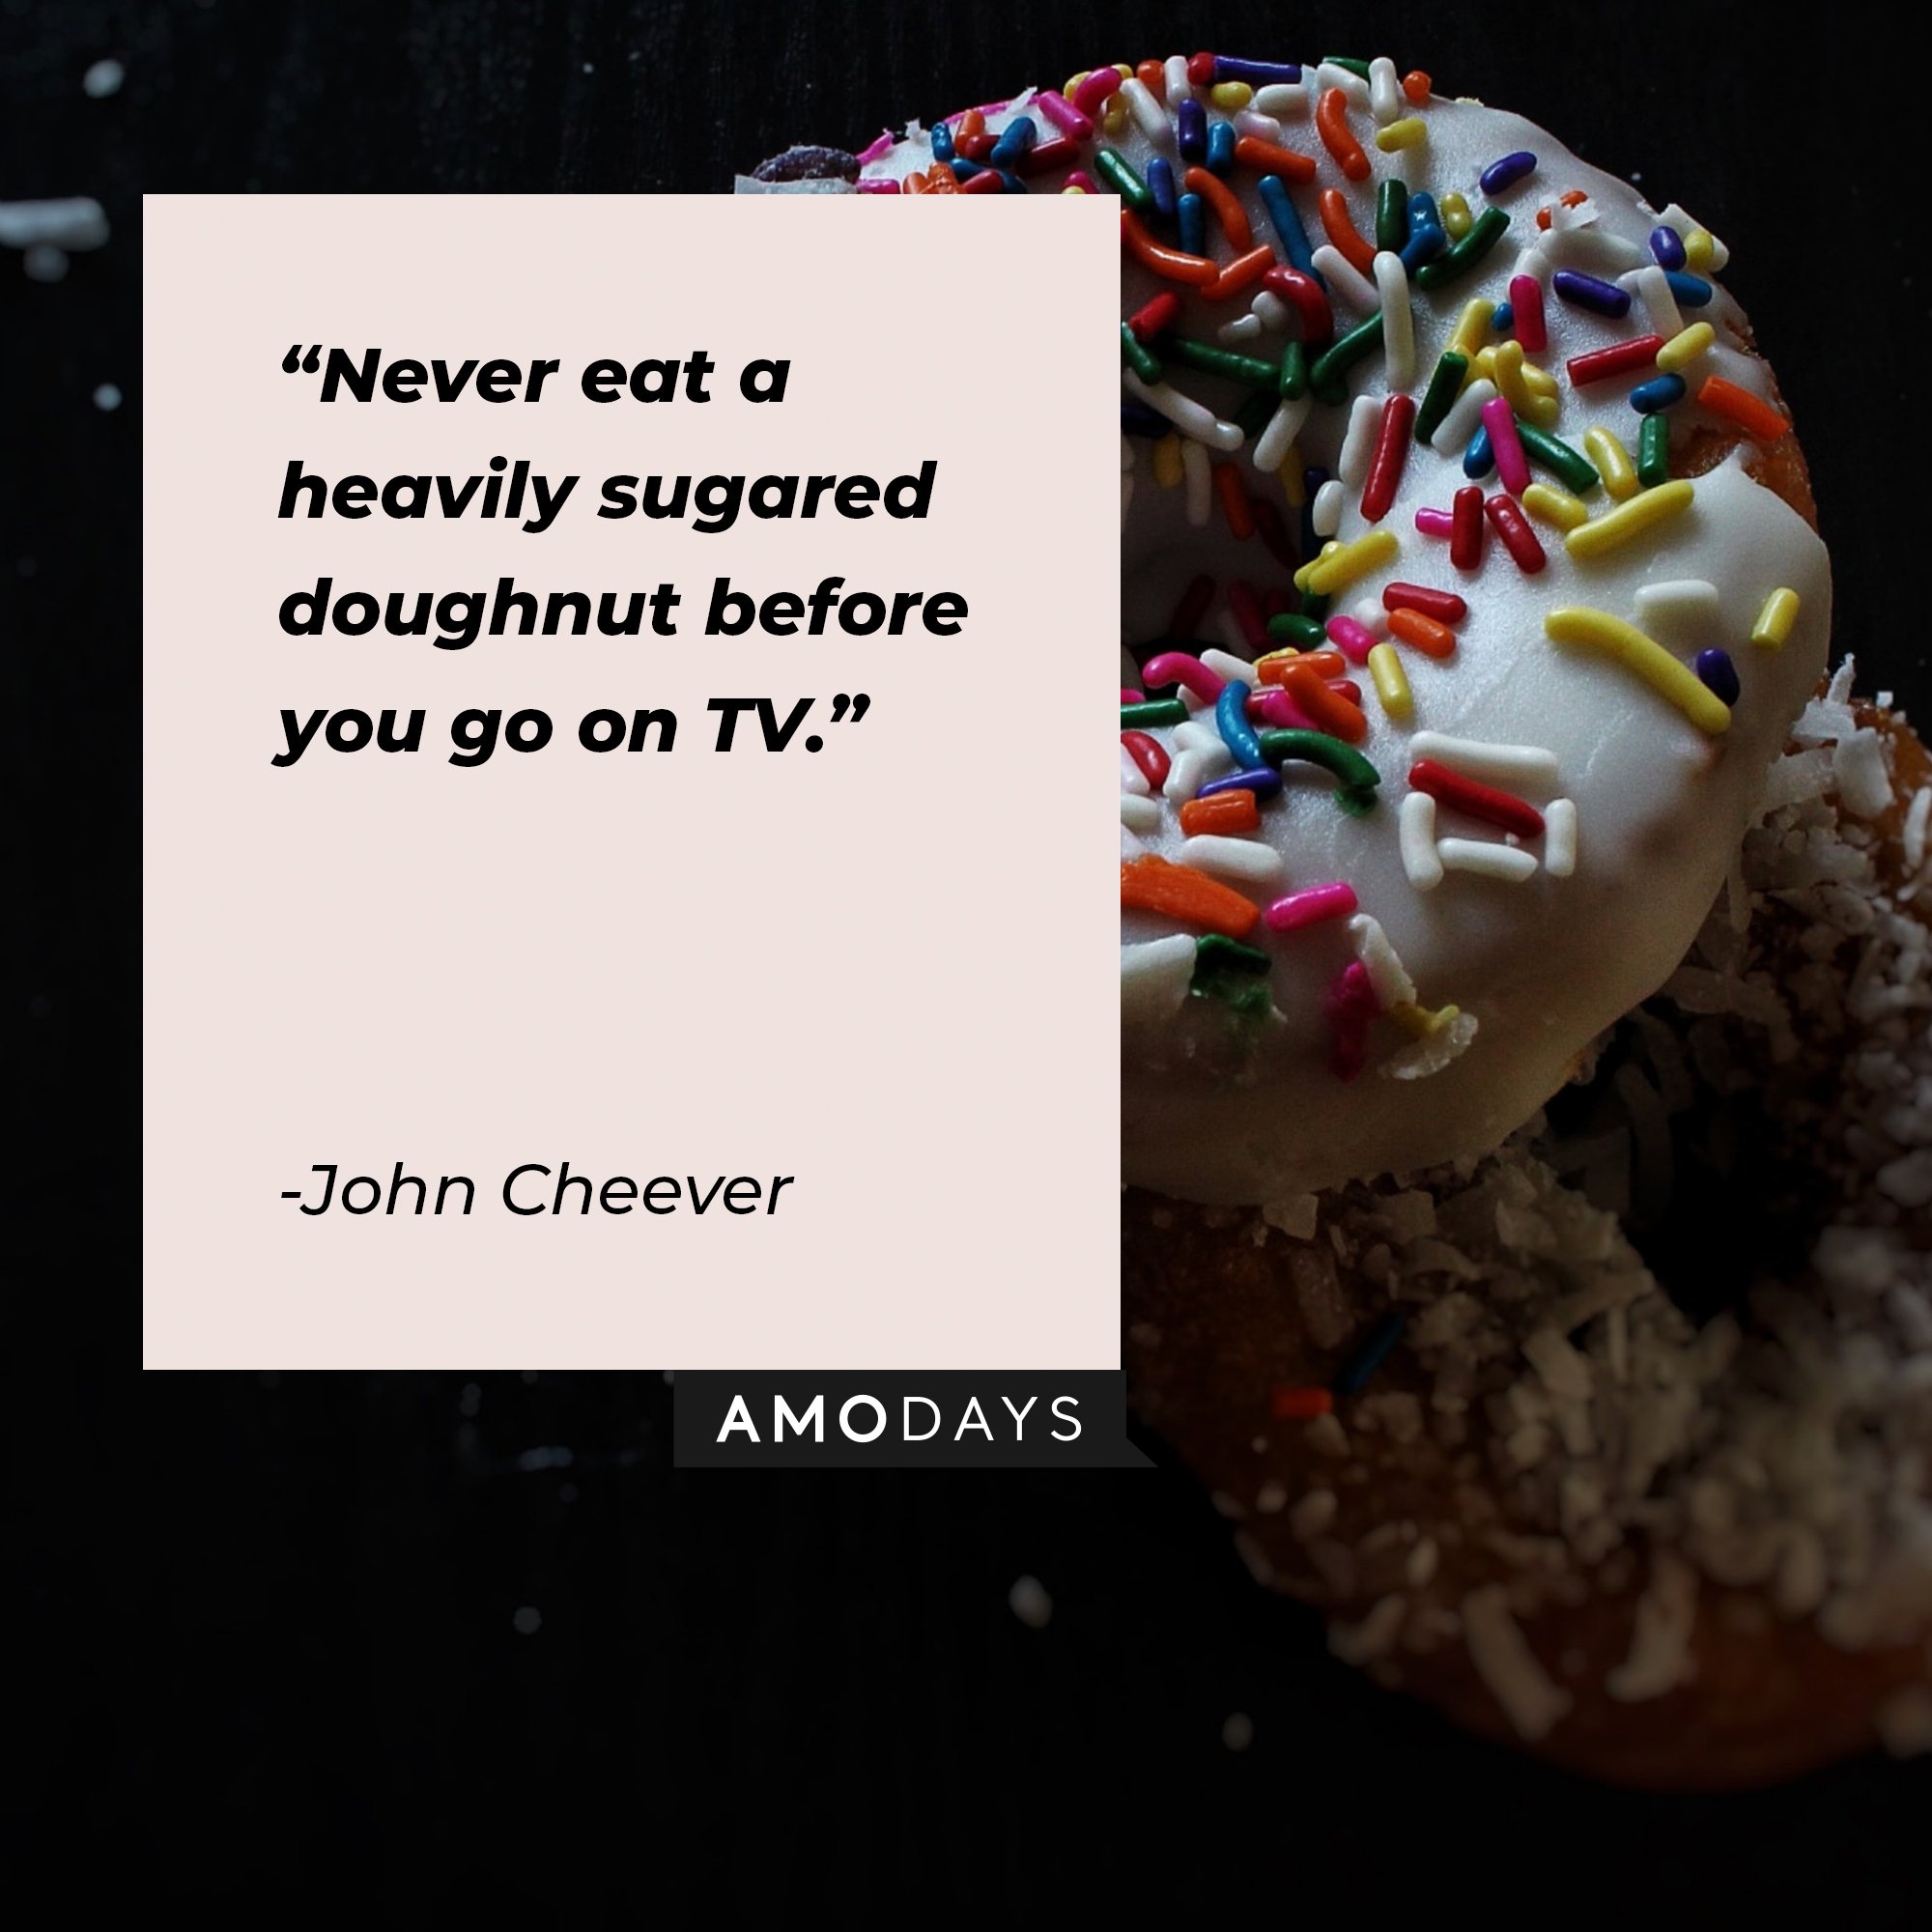 John Cheever's quote: "Never eat a heavily sugared doughnut before you go on TV." | Image: AmoDays